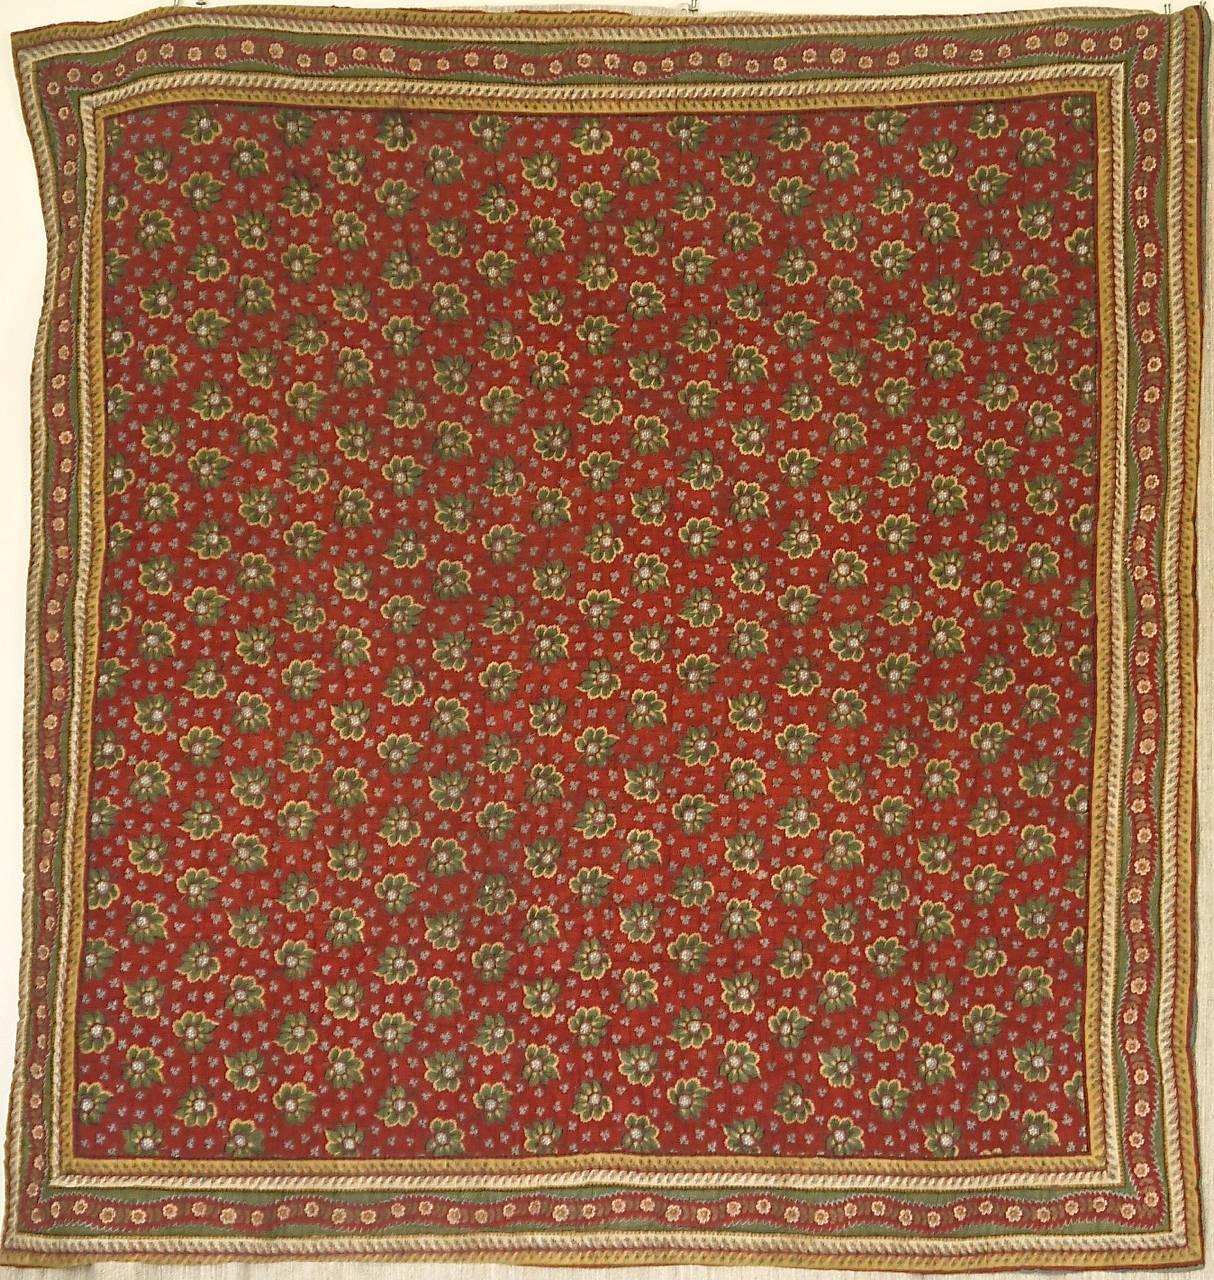 Early 19th century French mouchoir de cou, a woman's neckerchief, that has made into a charming small quilt. Simple block printed green leaves on a beautiful terracotta red ground. The reverse is an interesting wool woven on a cotton textile.
In